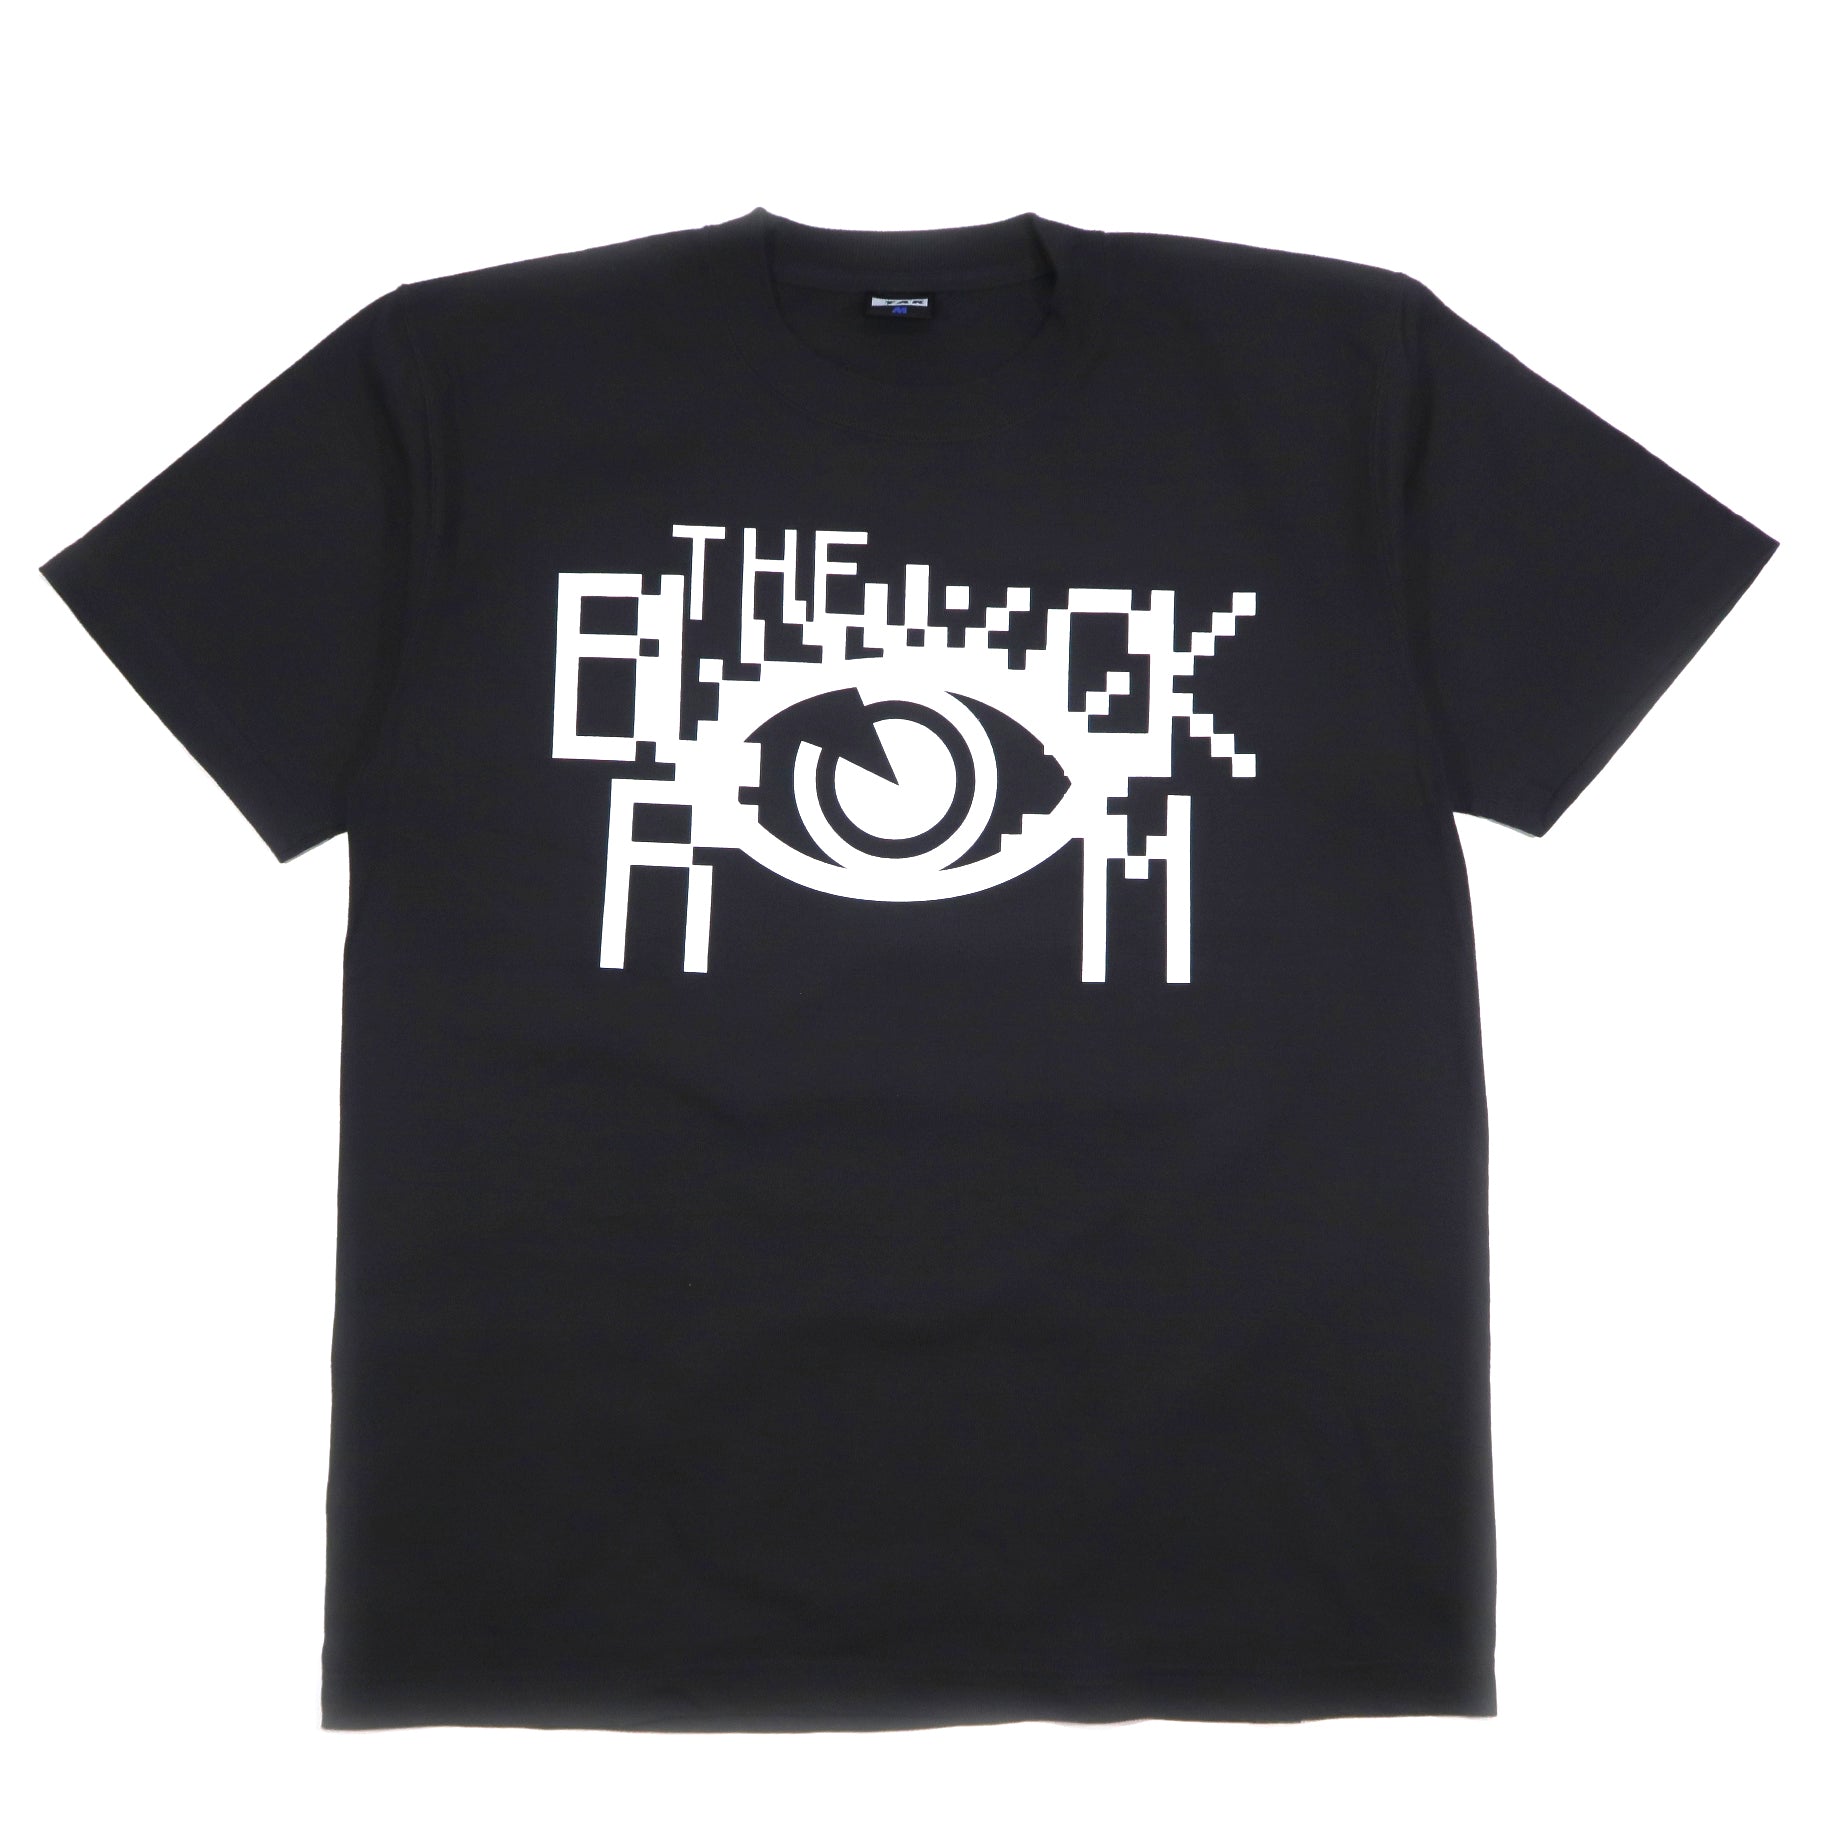 THE BLEYECK ROOM S/s T-shirts